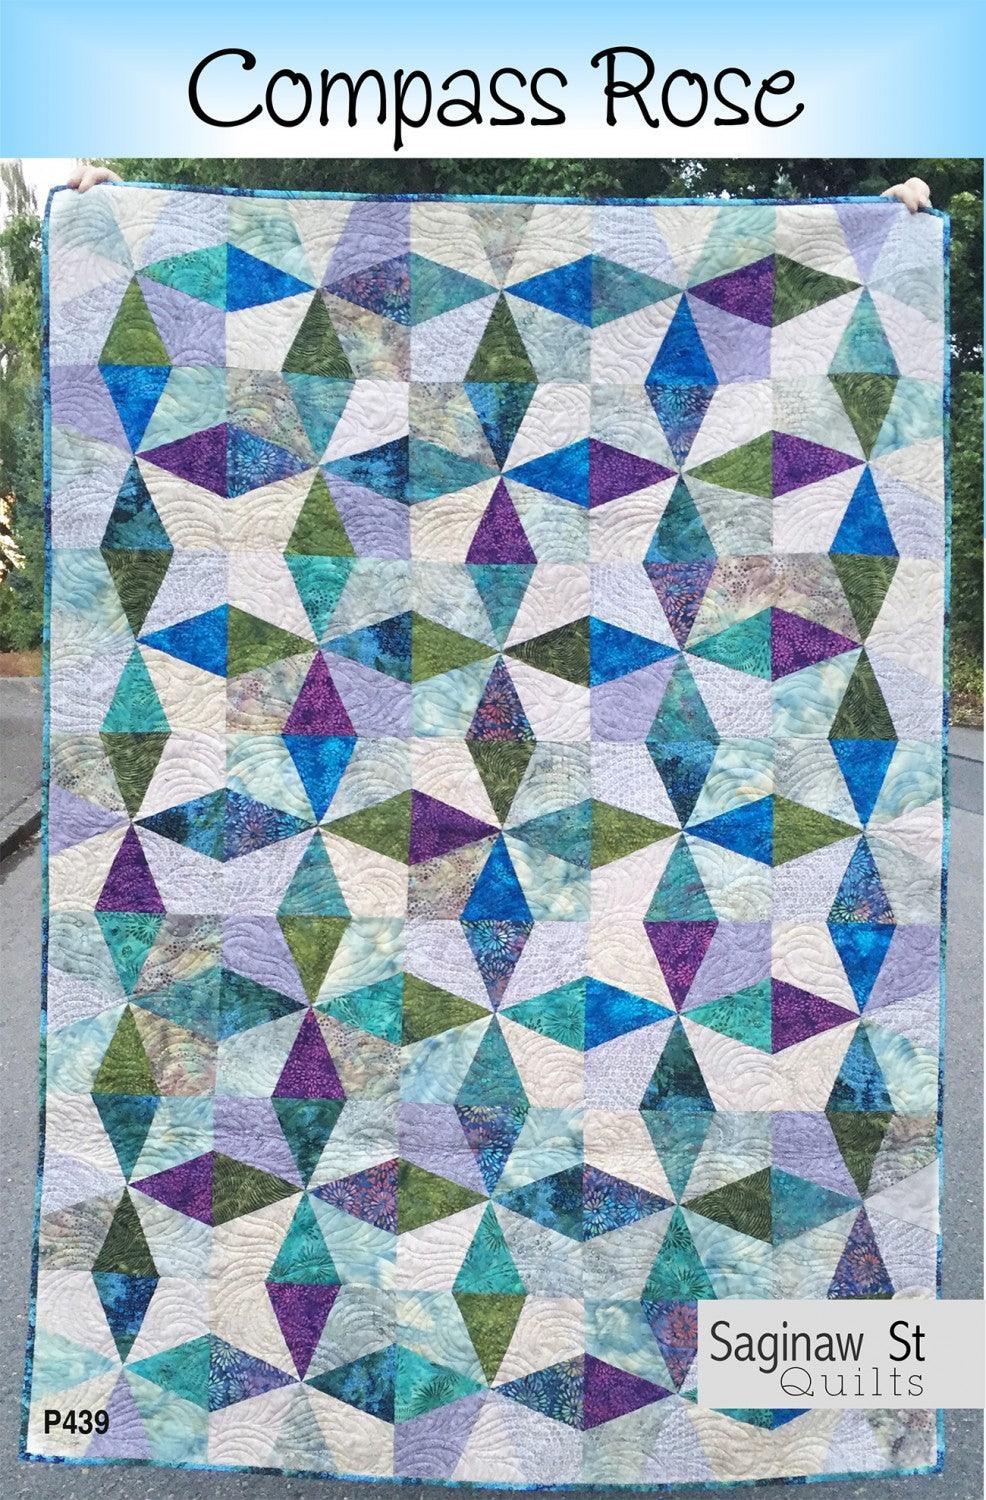 Compass Rose - Quilt Pattern - Saginaw St Quilt Co - Kawartha Quilting and Sewing LTD.